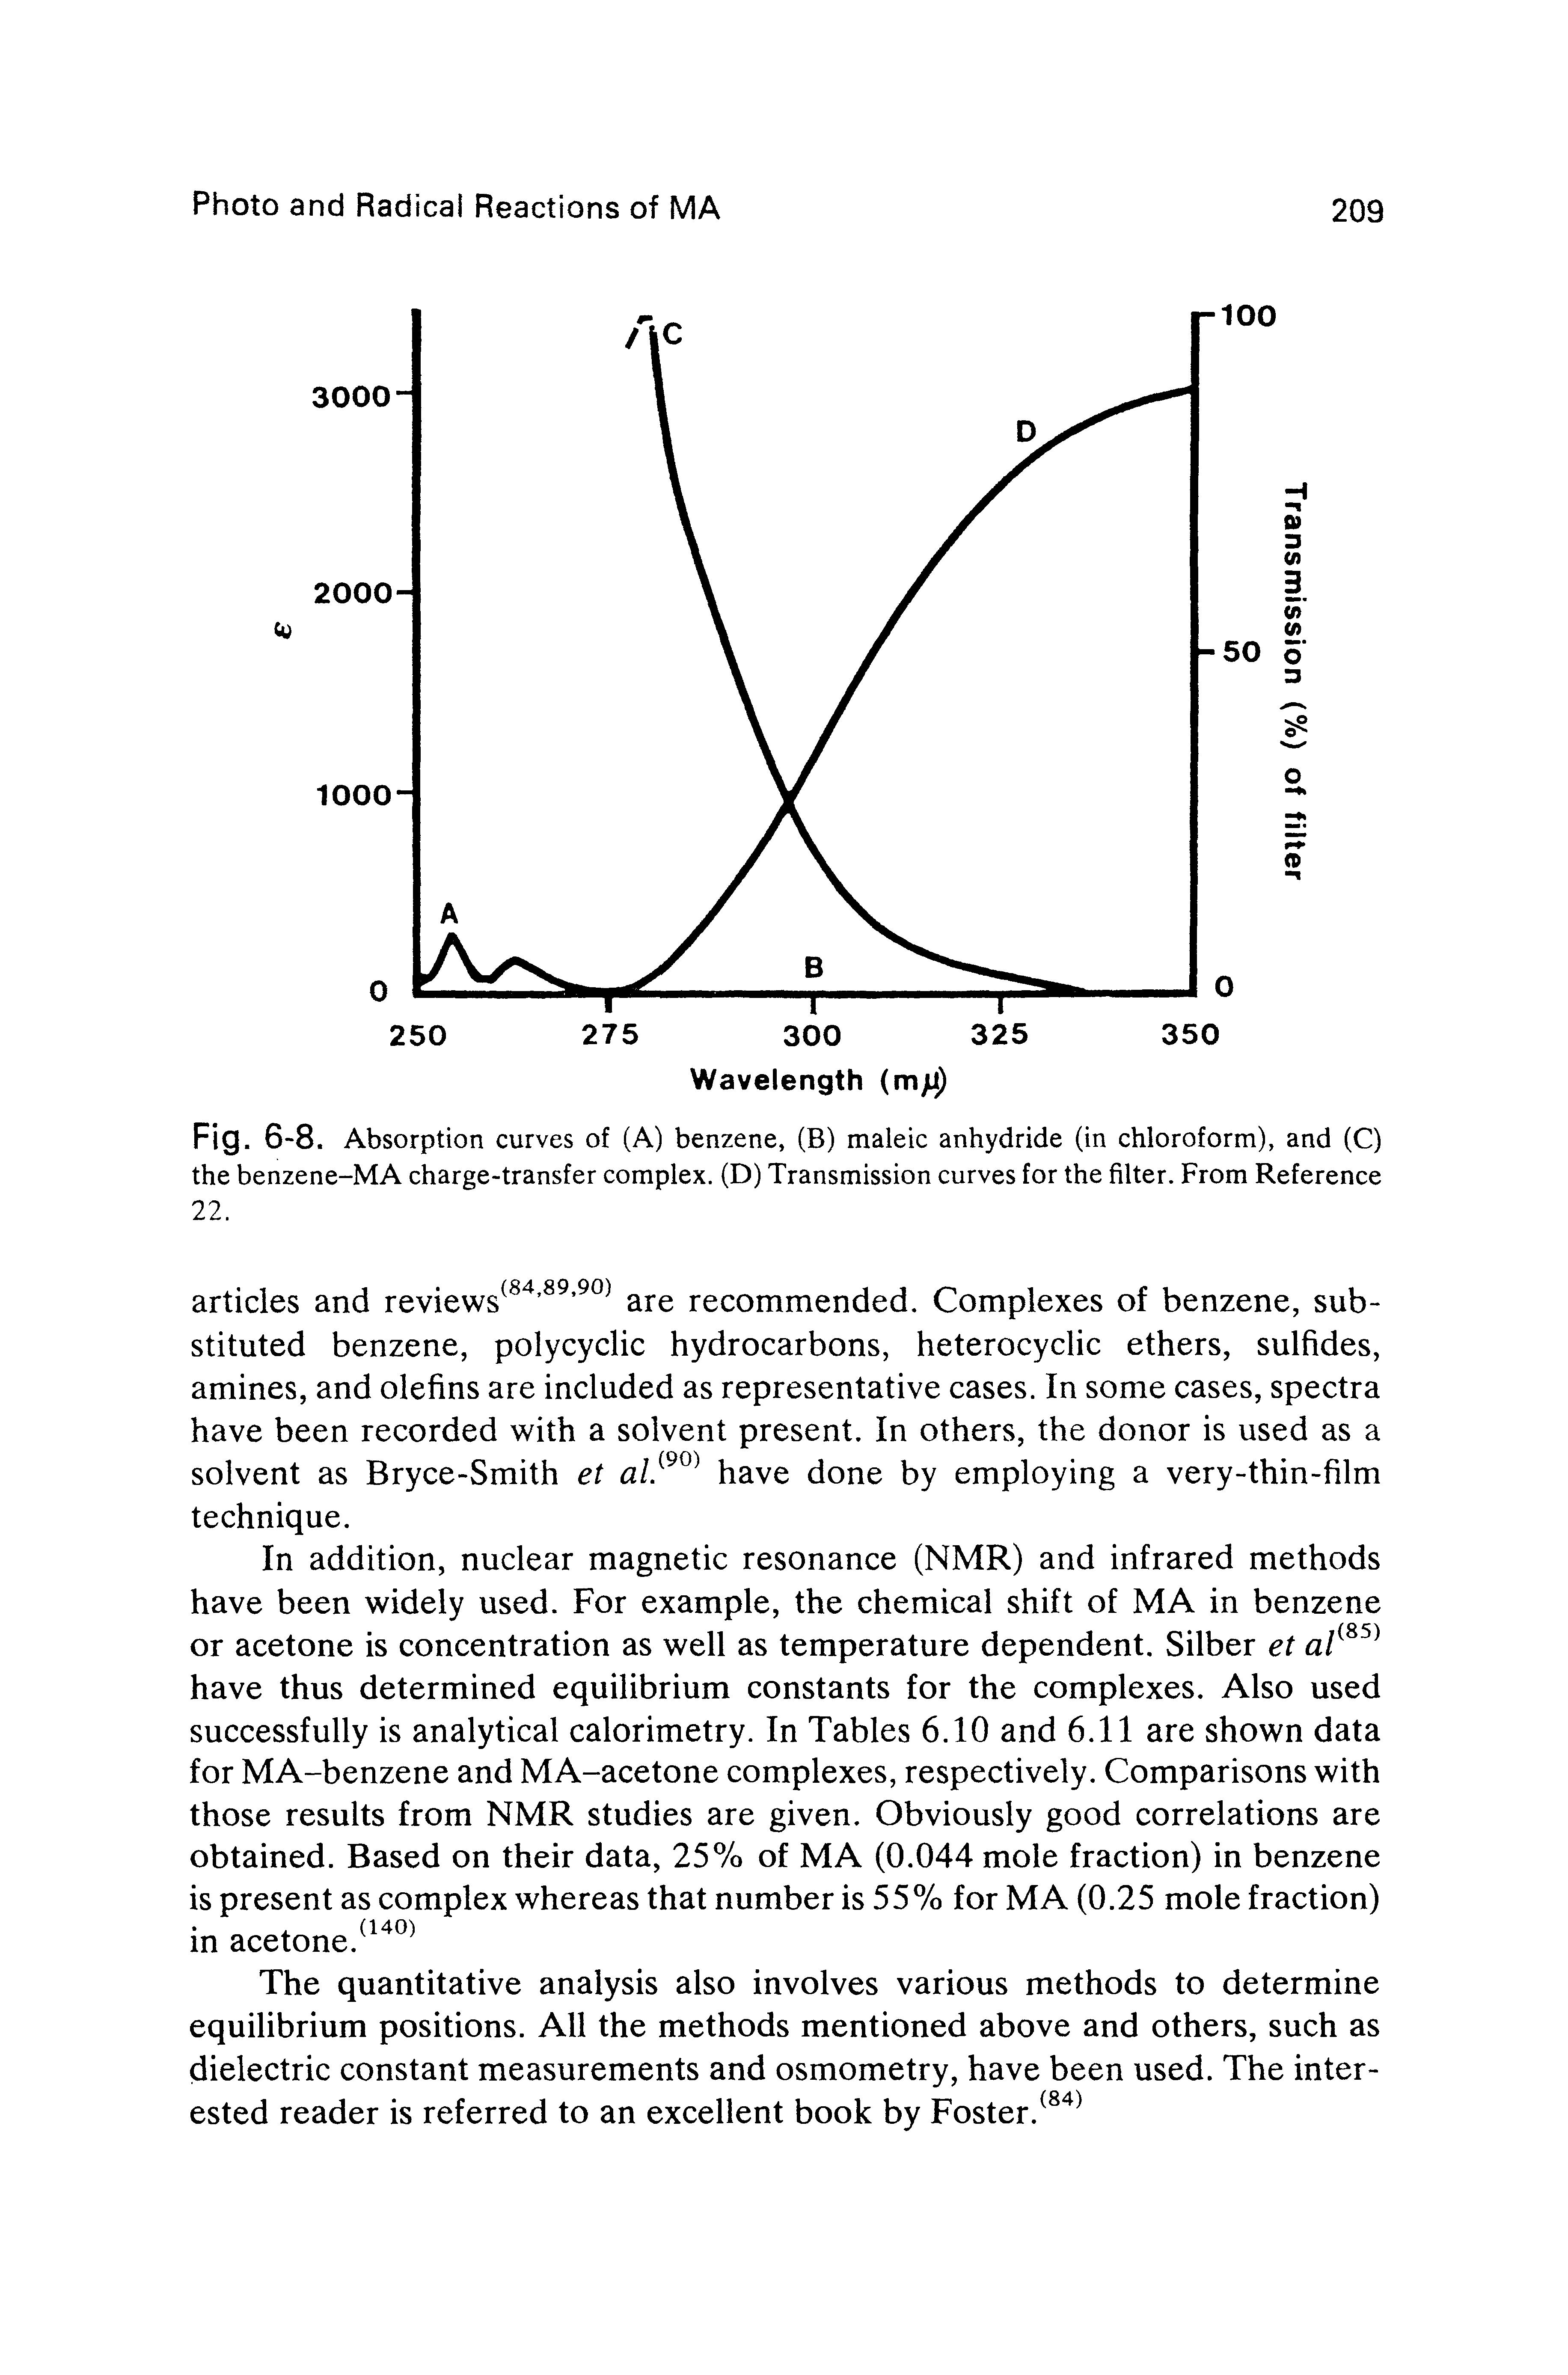 Fig. 6-8. Absorption curves of (A) benzene, (B) maleic anhydride (in chloroform), and (C) the benzene-MA charge-transfer complex. (D) Transmission curves for the filter. From Reference...